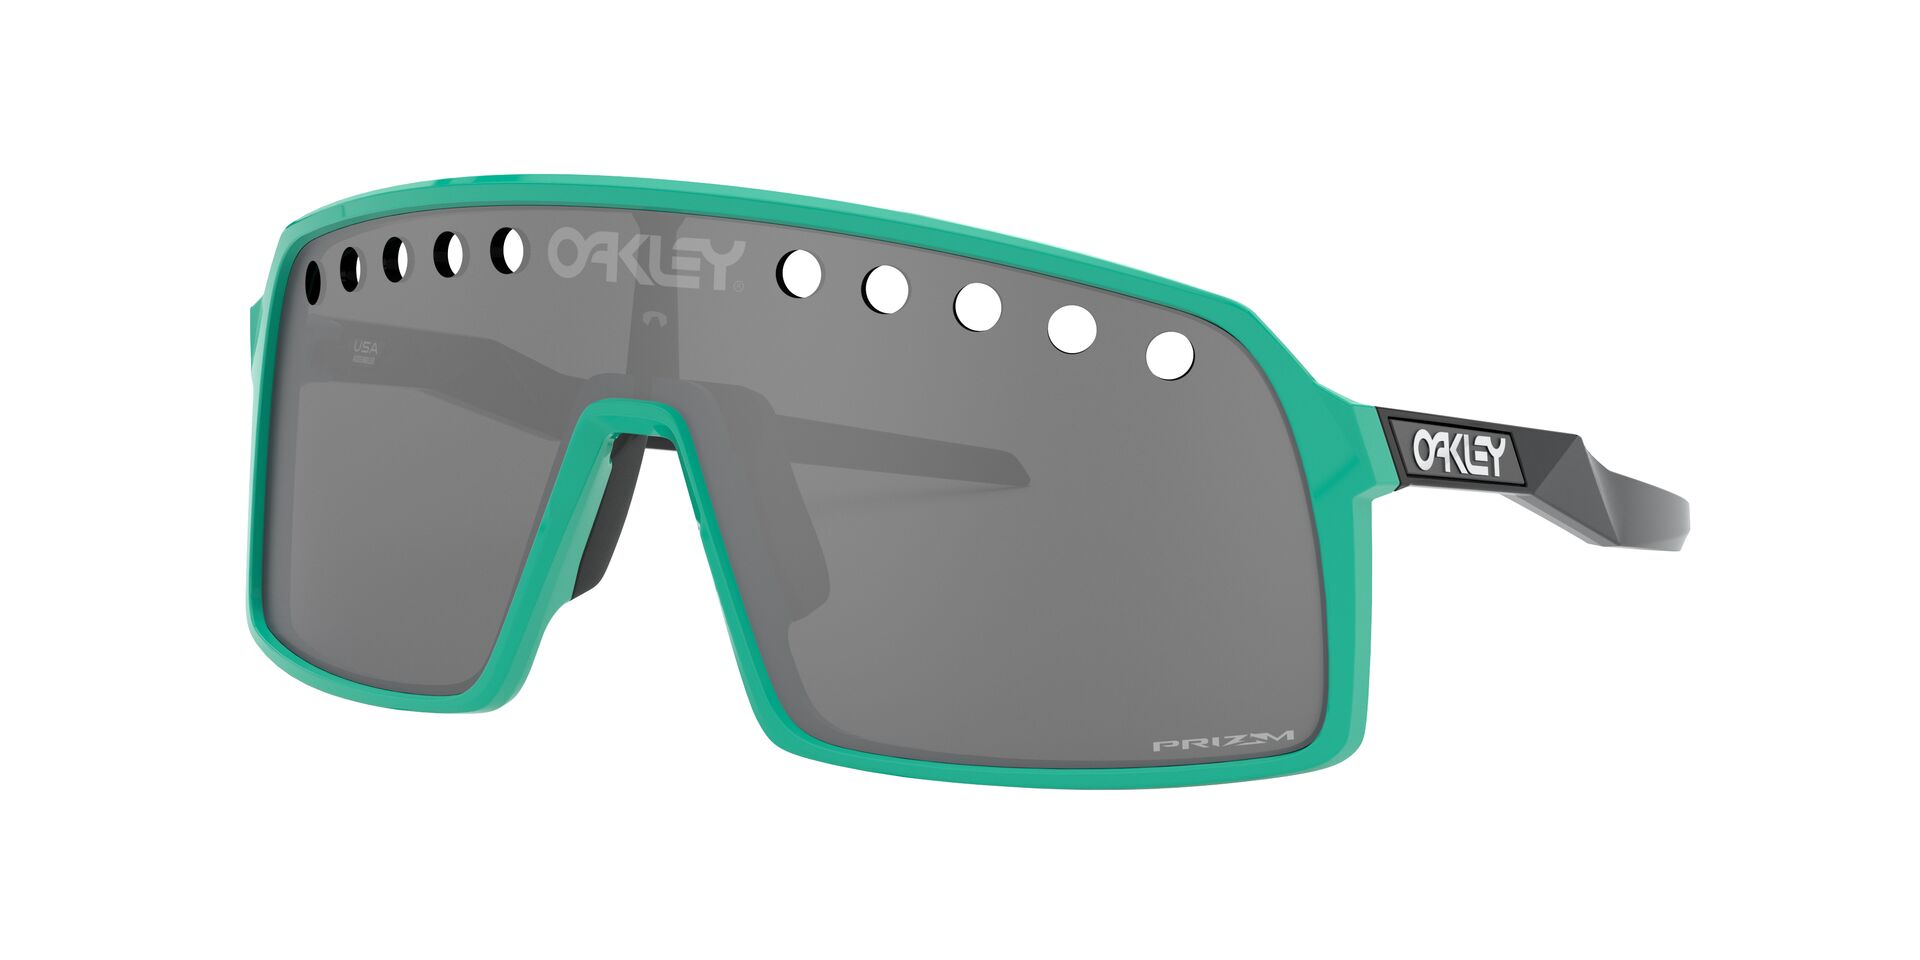 Oakley Spring 2020 Sunglasses | Collection Overview | SportRx